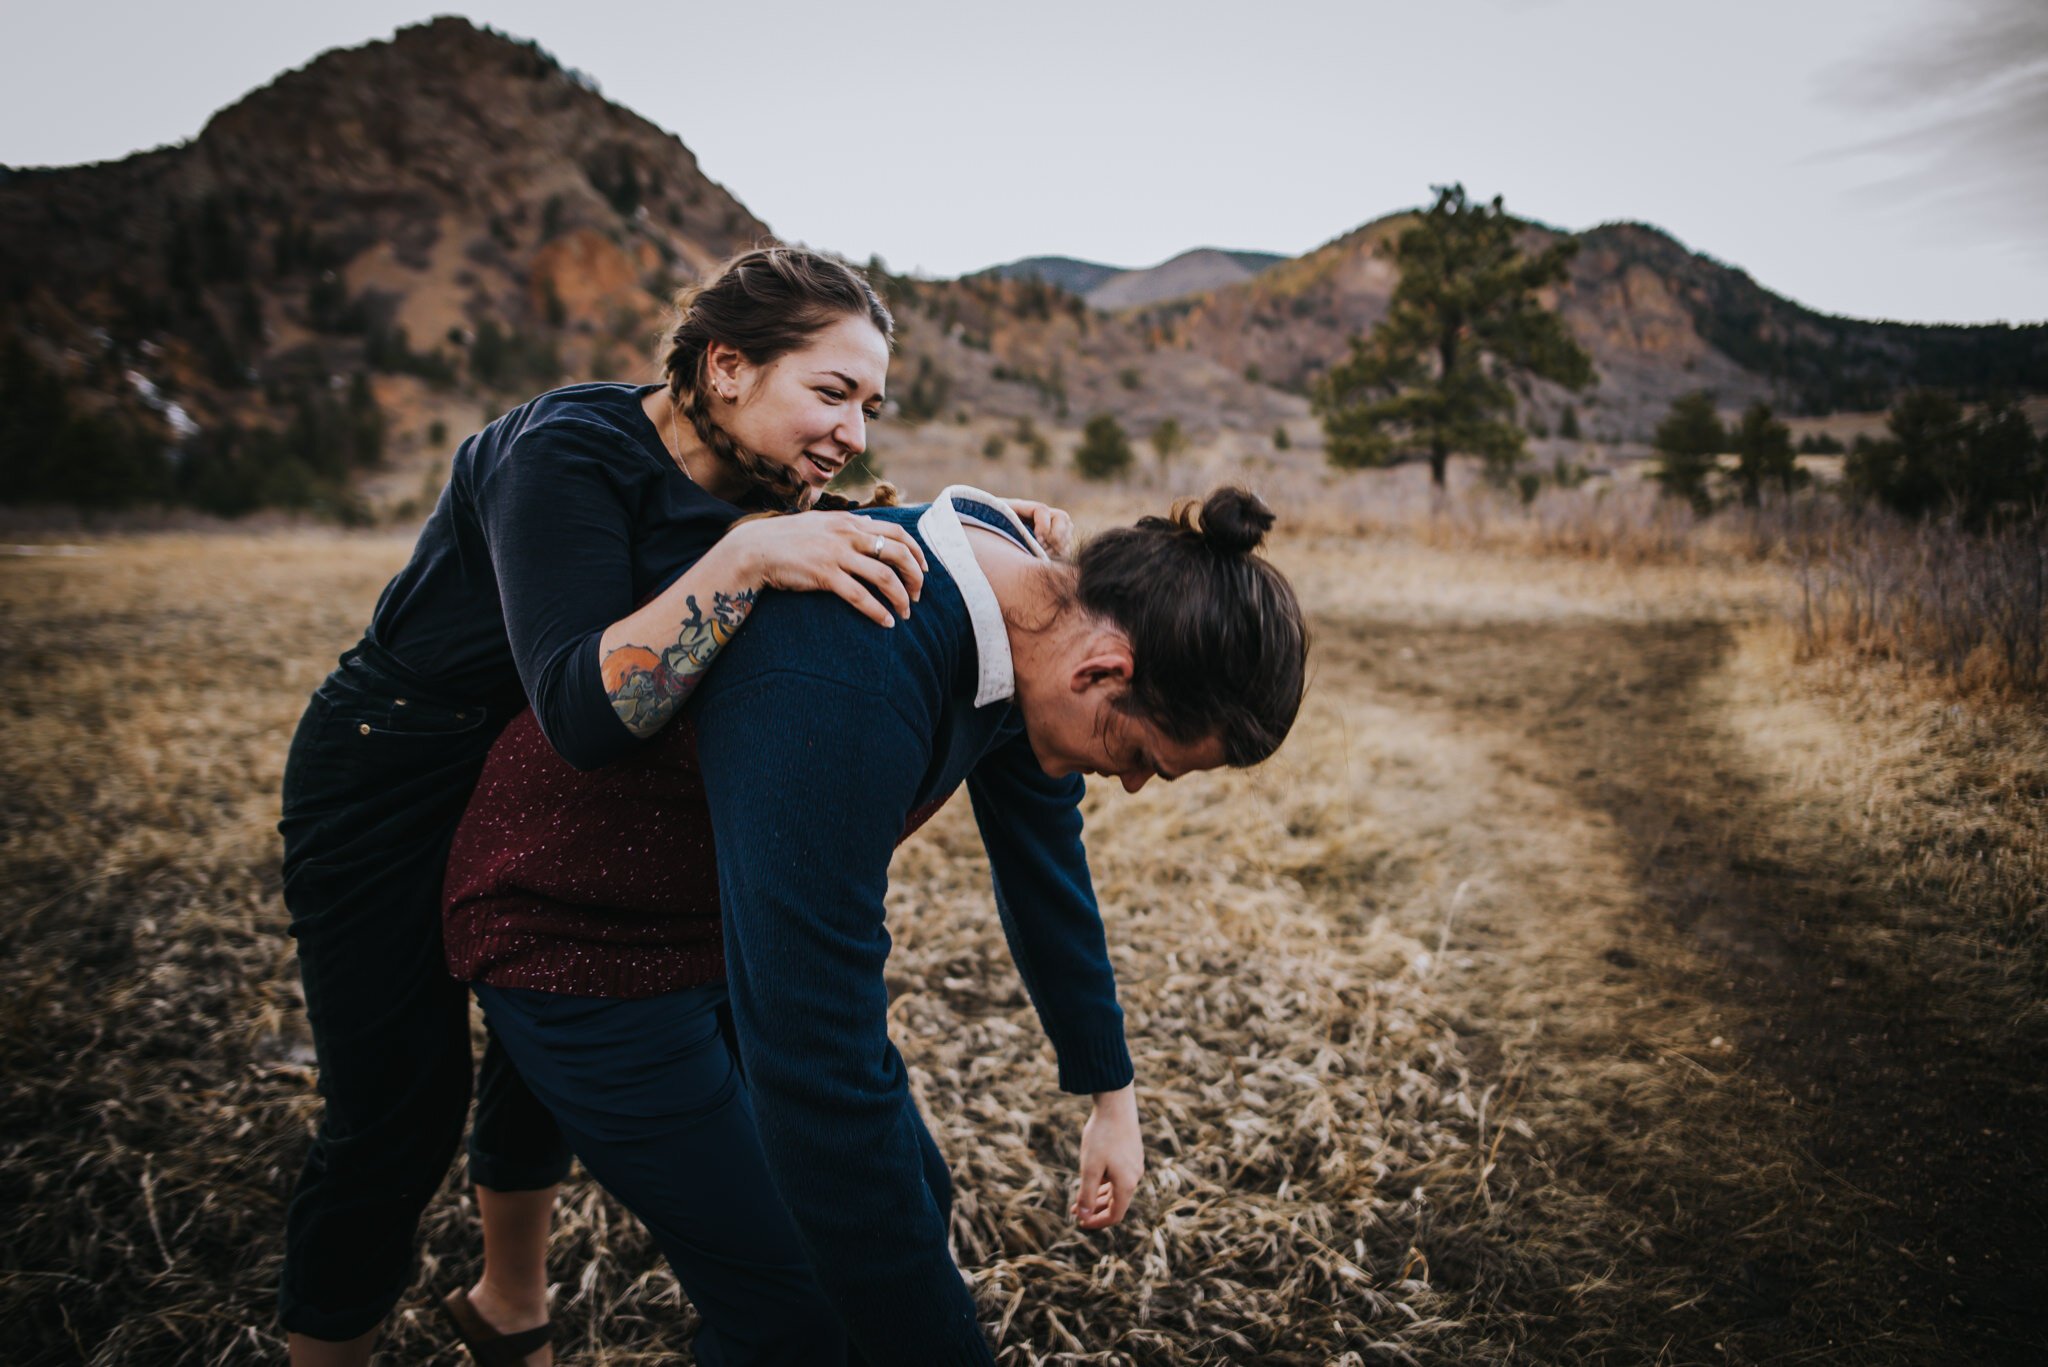 Yulia+and+Logan+Couples+Session+Colorado+Springs+Colorado+Sunset+Cheyenne+Canyon+Husband+Wife+Wild+Prairie+Photography-15-2020.jpeg